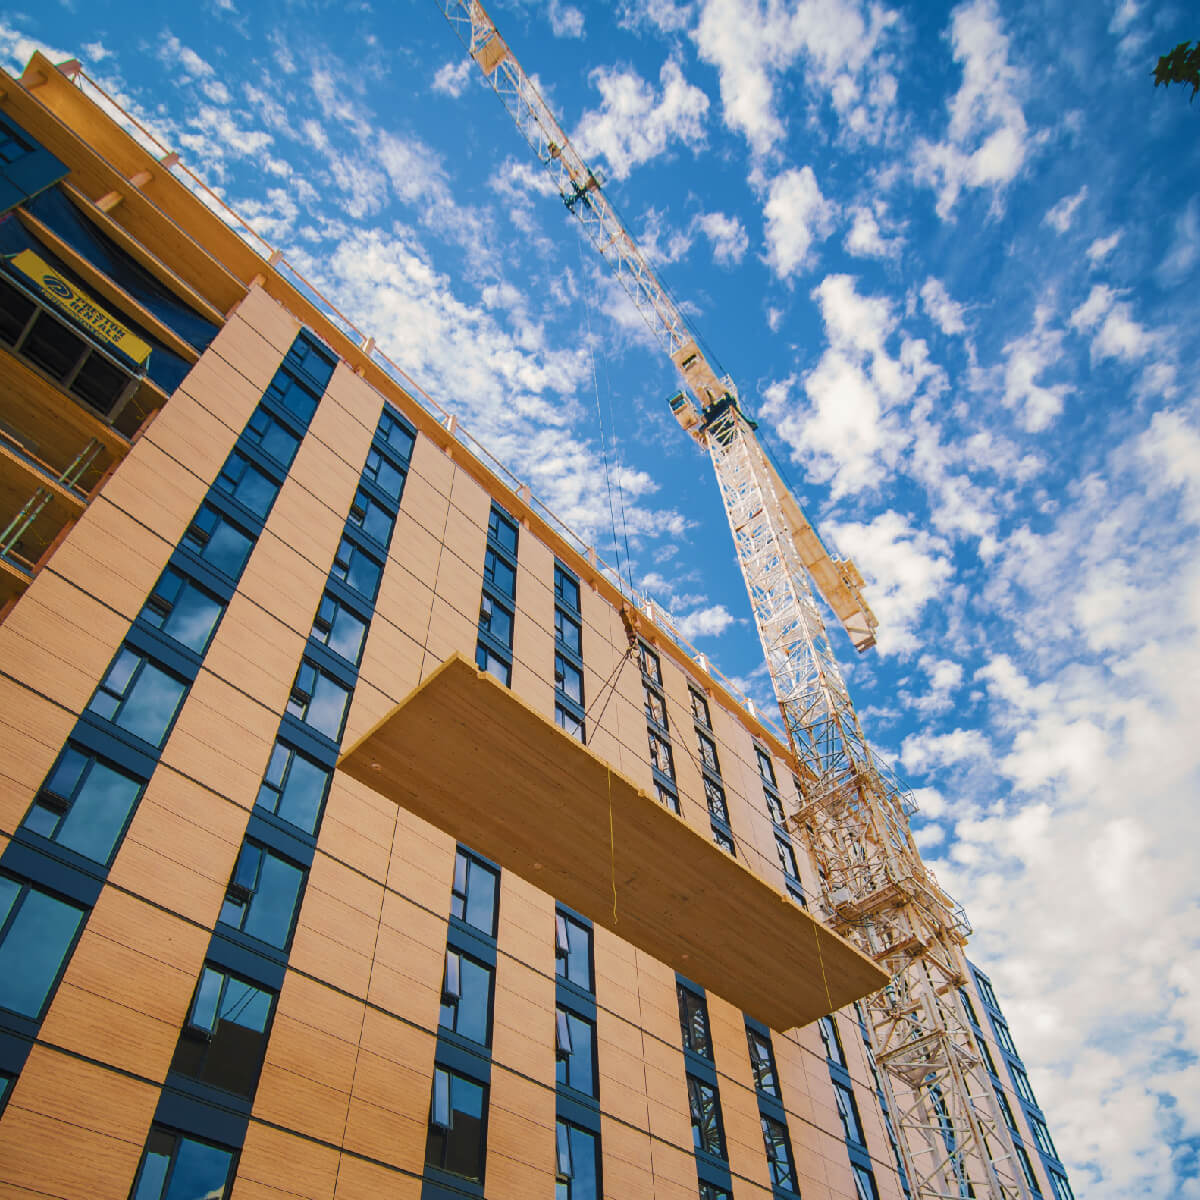 looking up at a tall beige building with a crane on top, framed against a blue sky